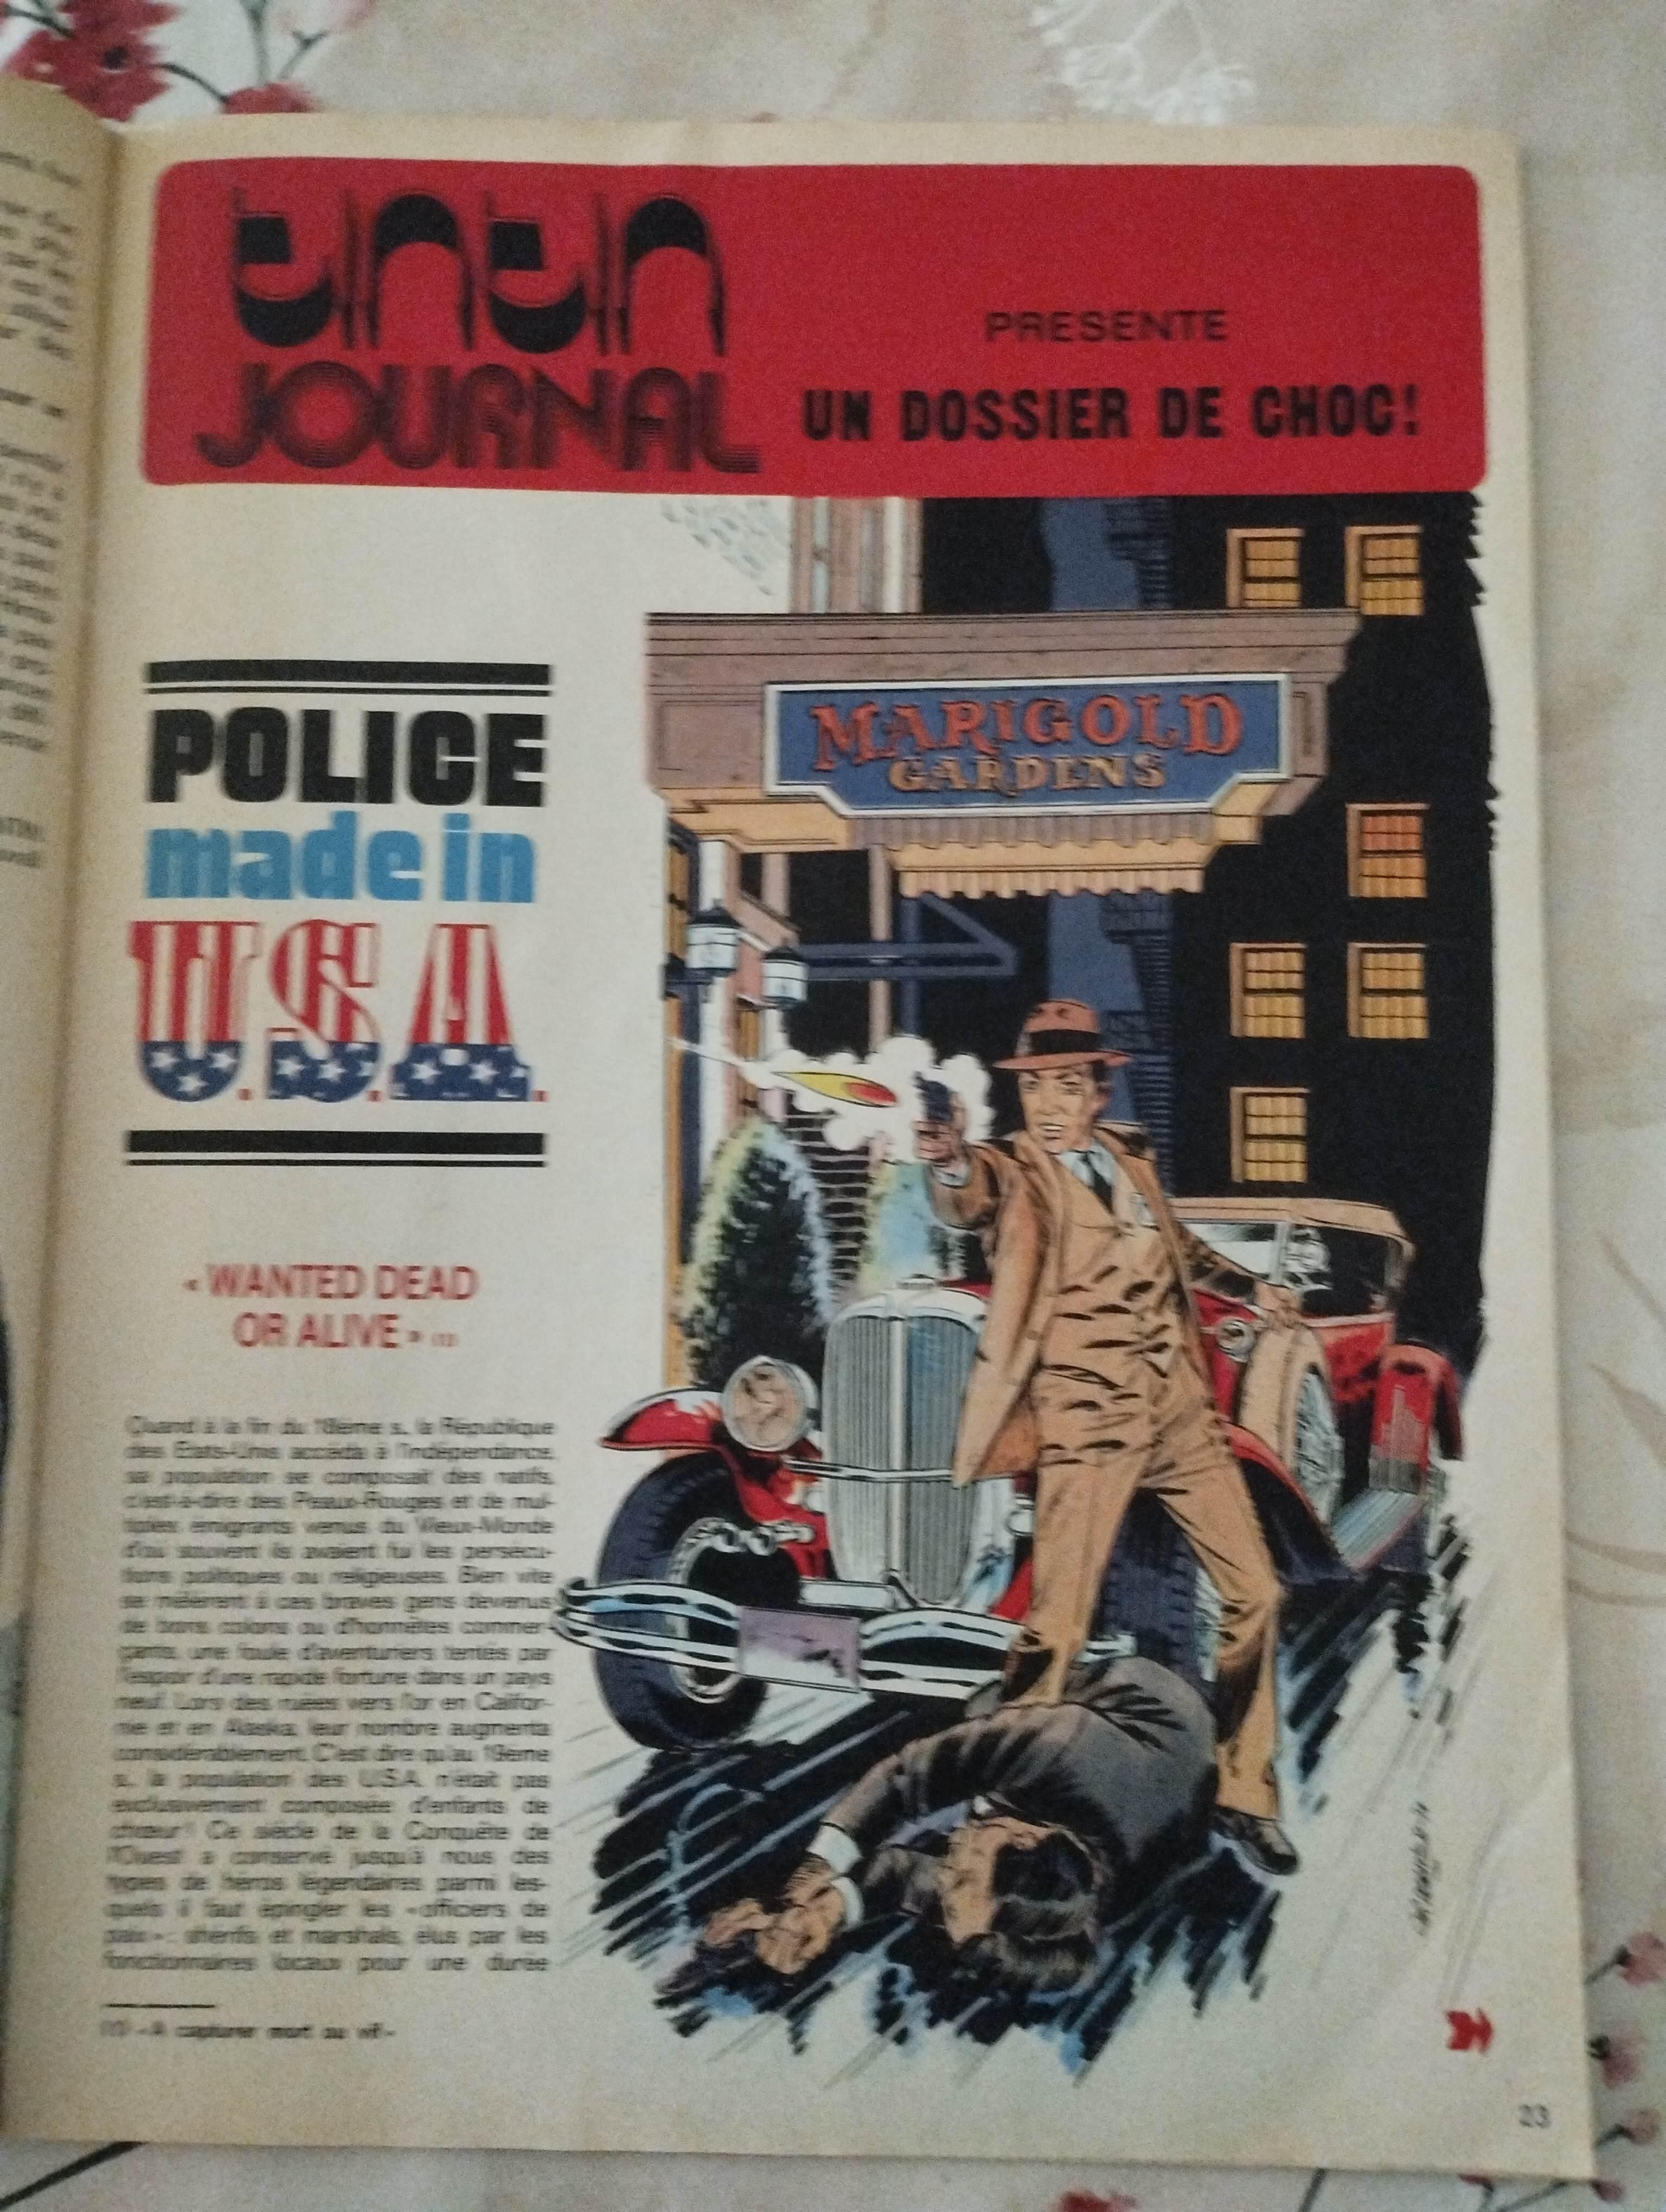 troc de troc tintin journal - police made in usa image 0